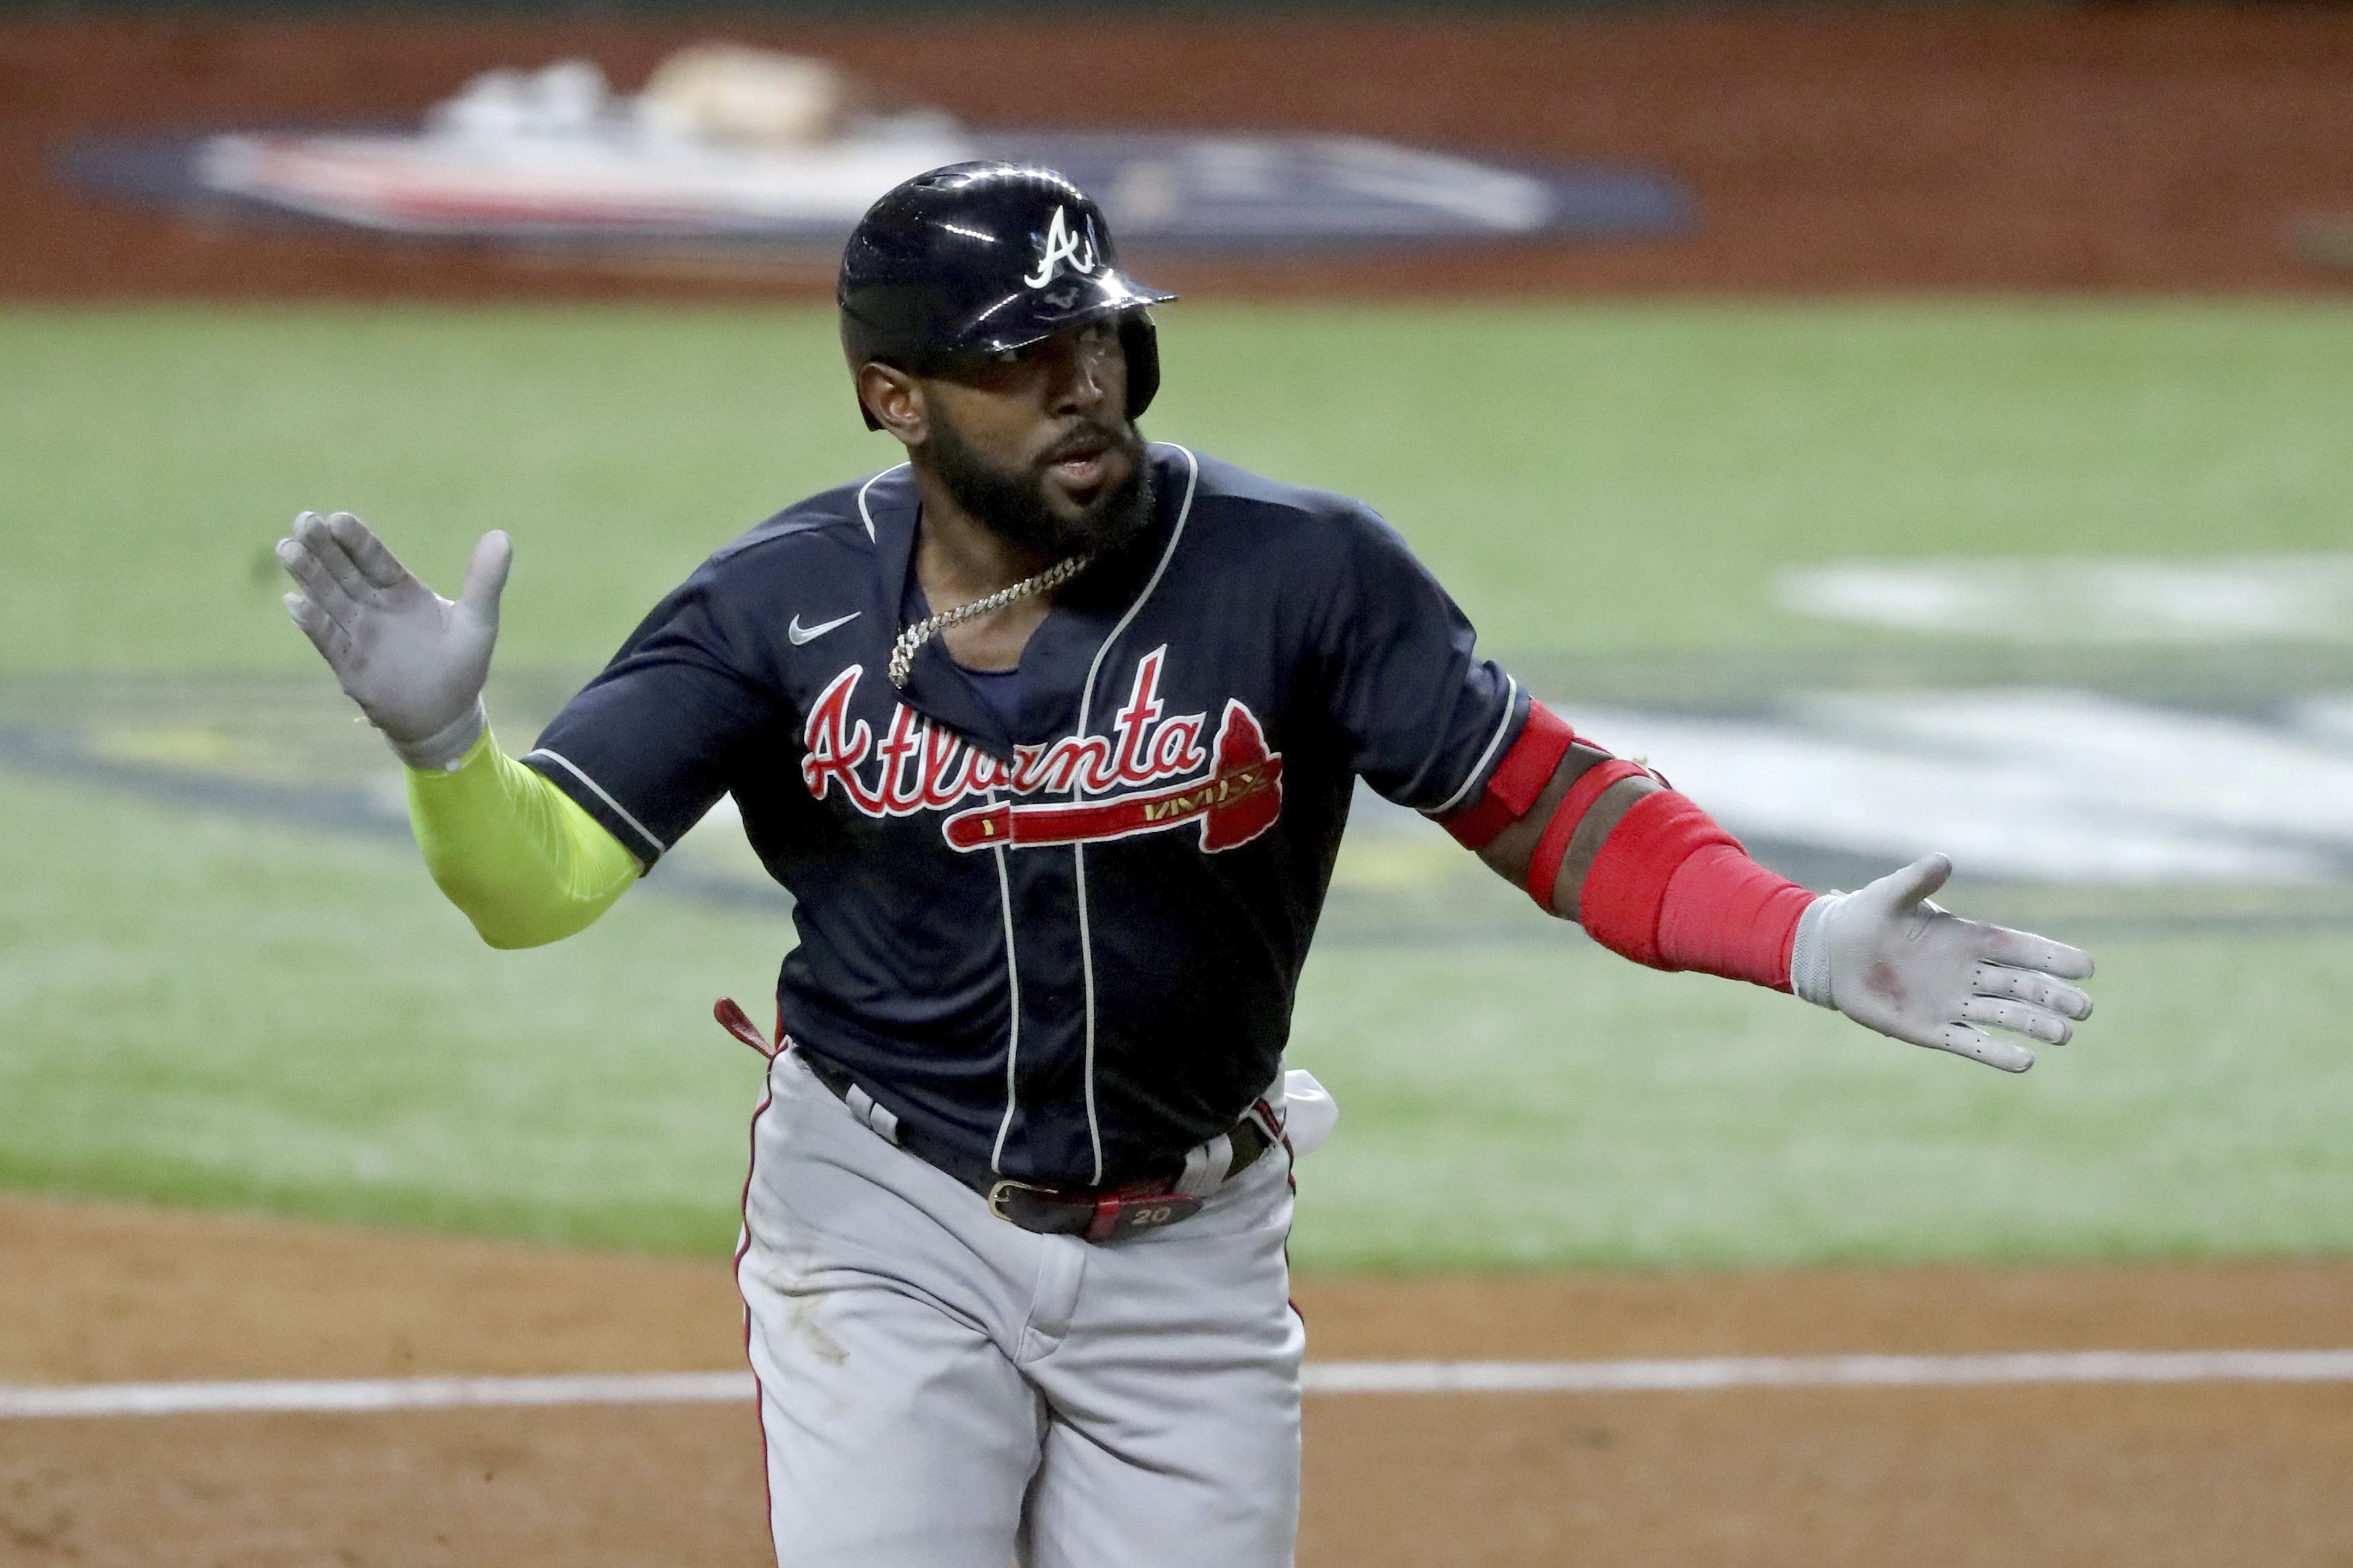 Ozzie Albies homers, bullpen falters in Braves spring loss to the Tigers